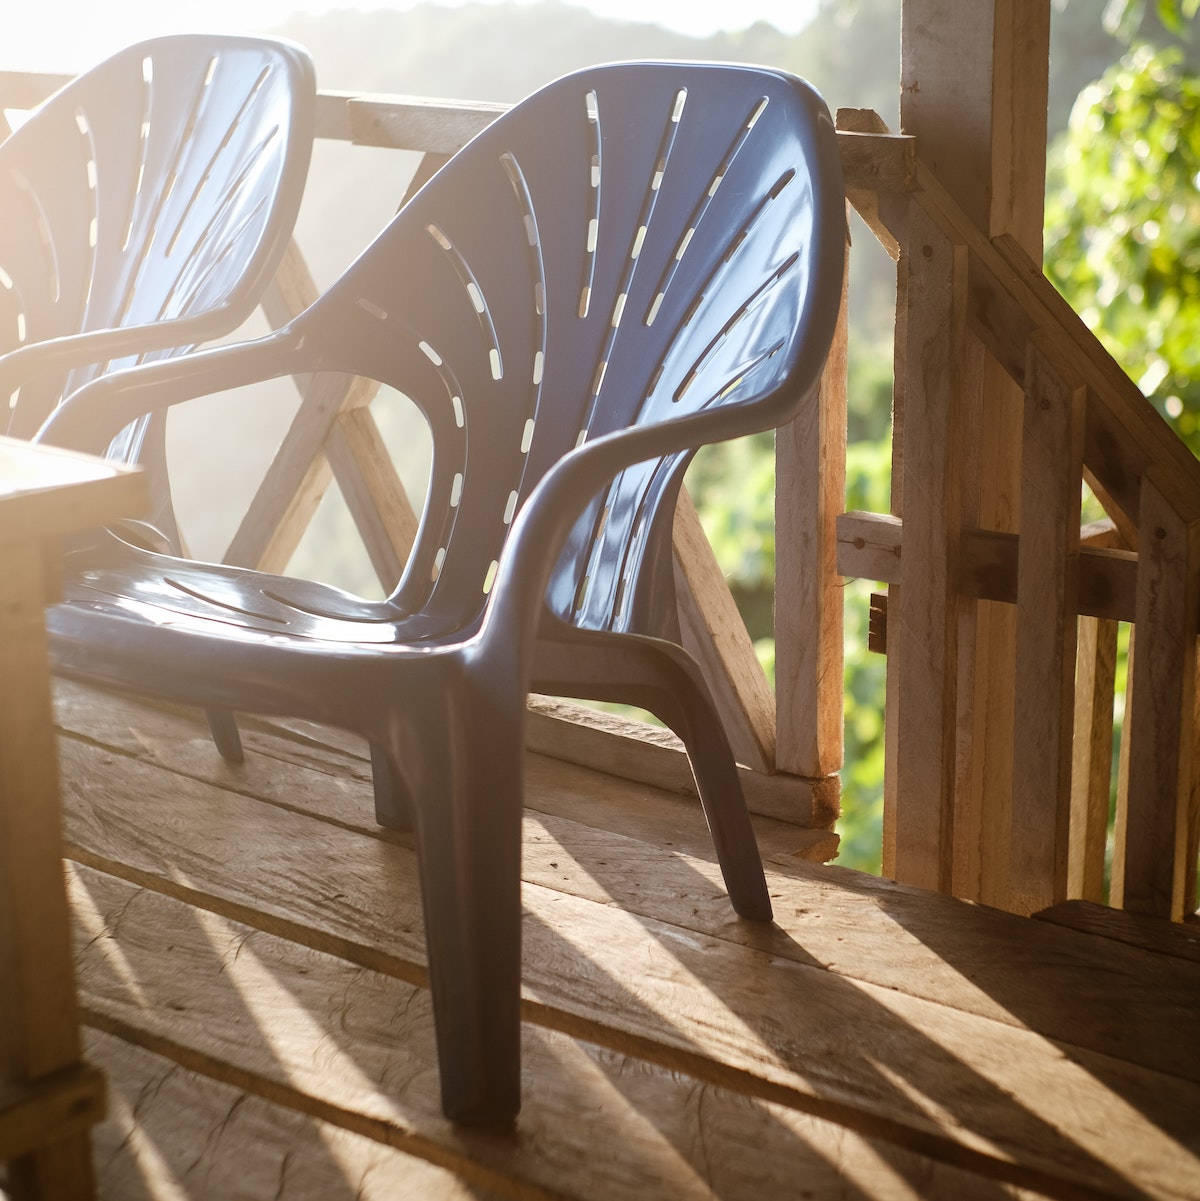 How to clean plastic outdoor furniture